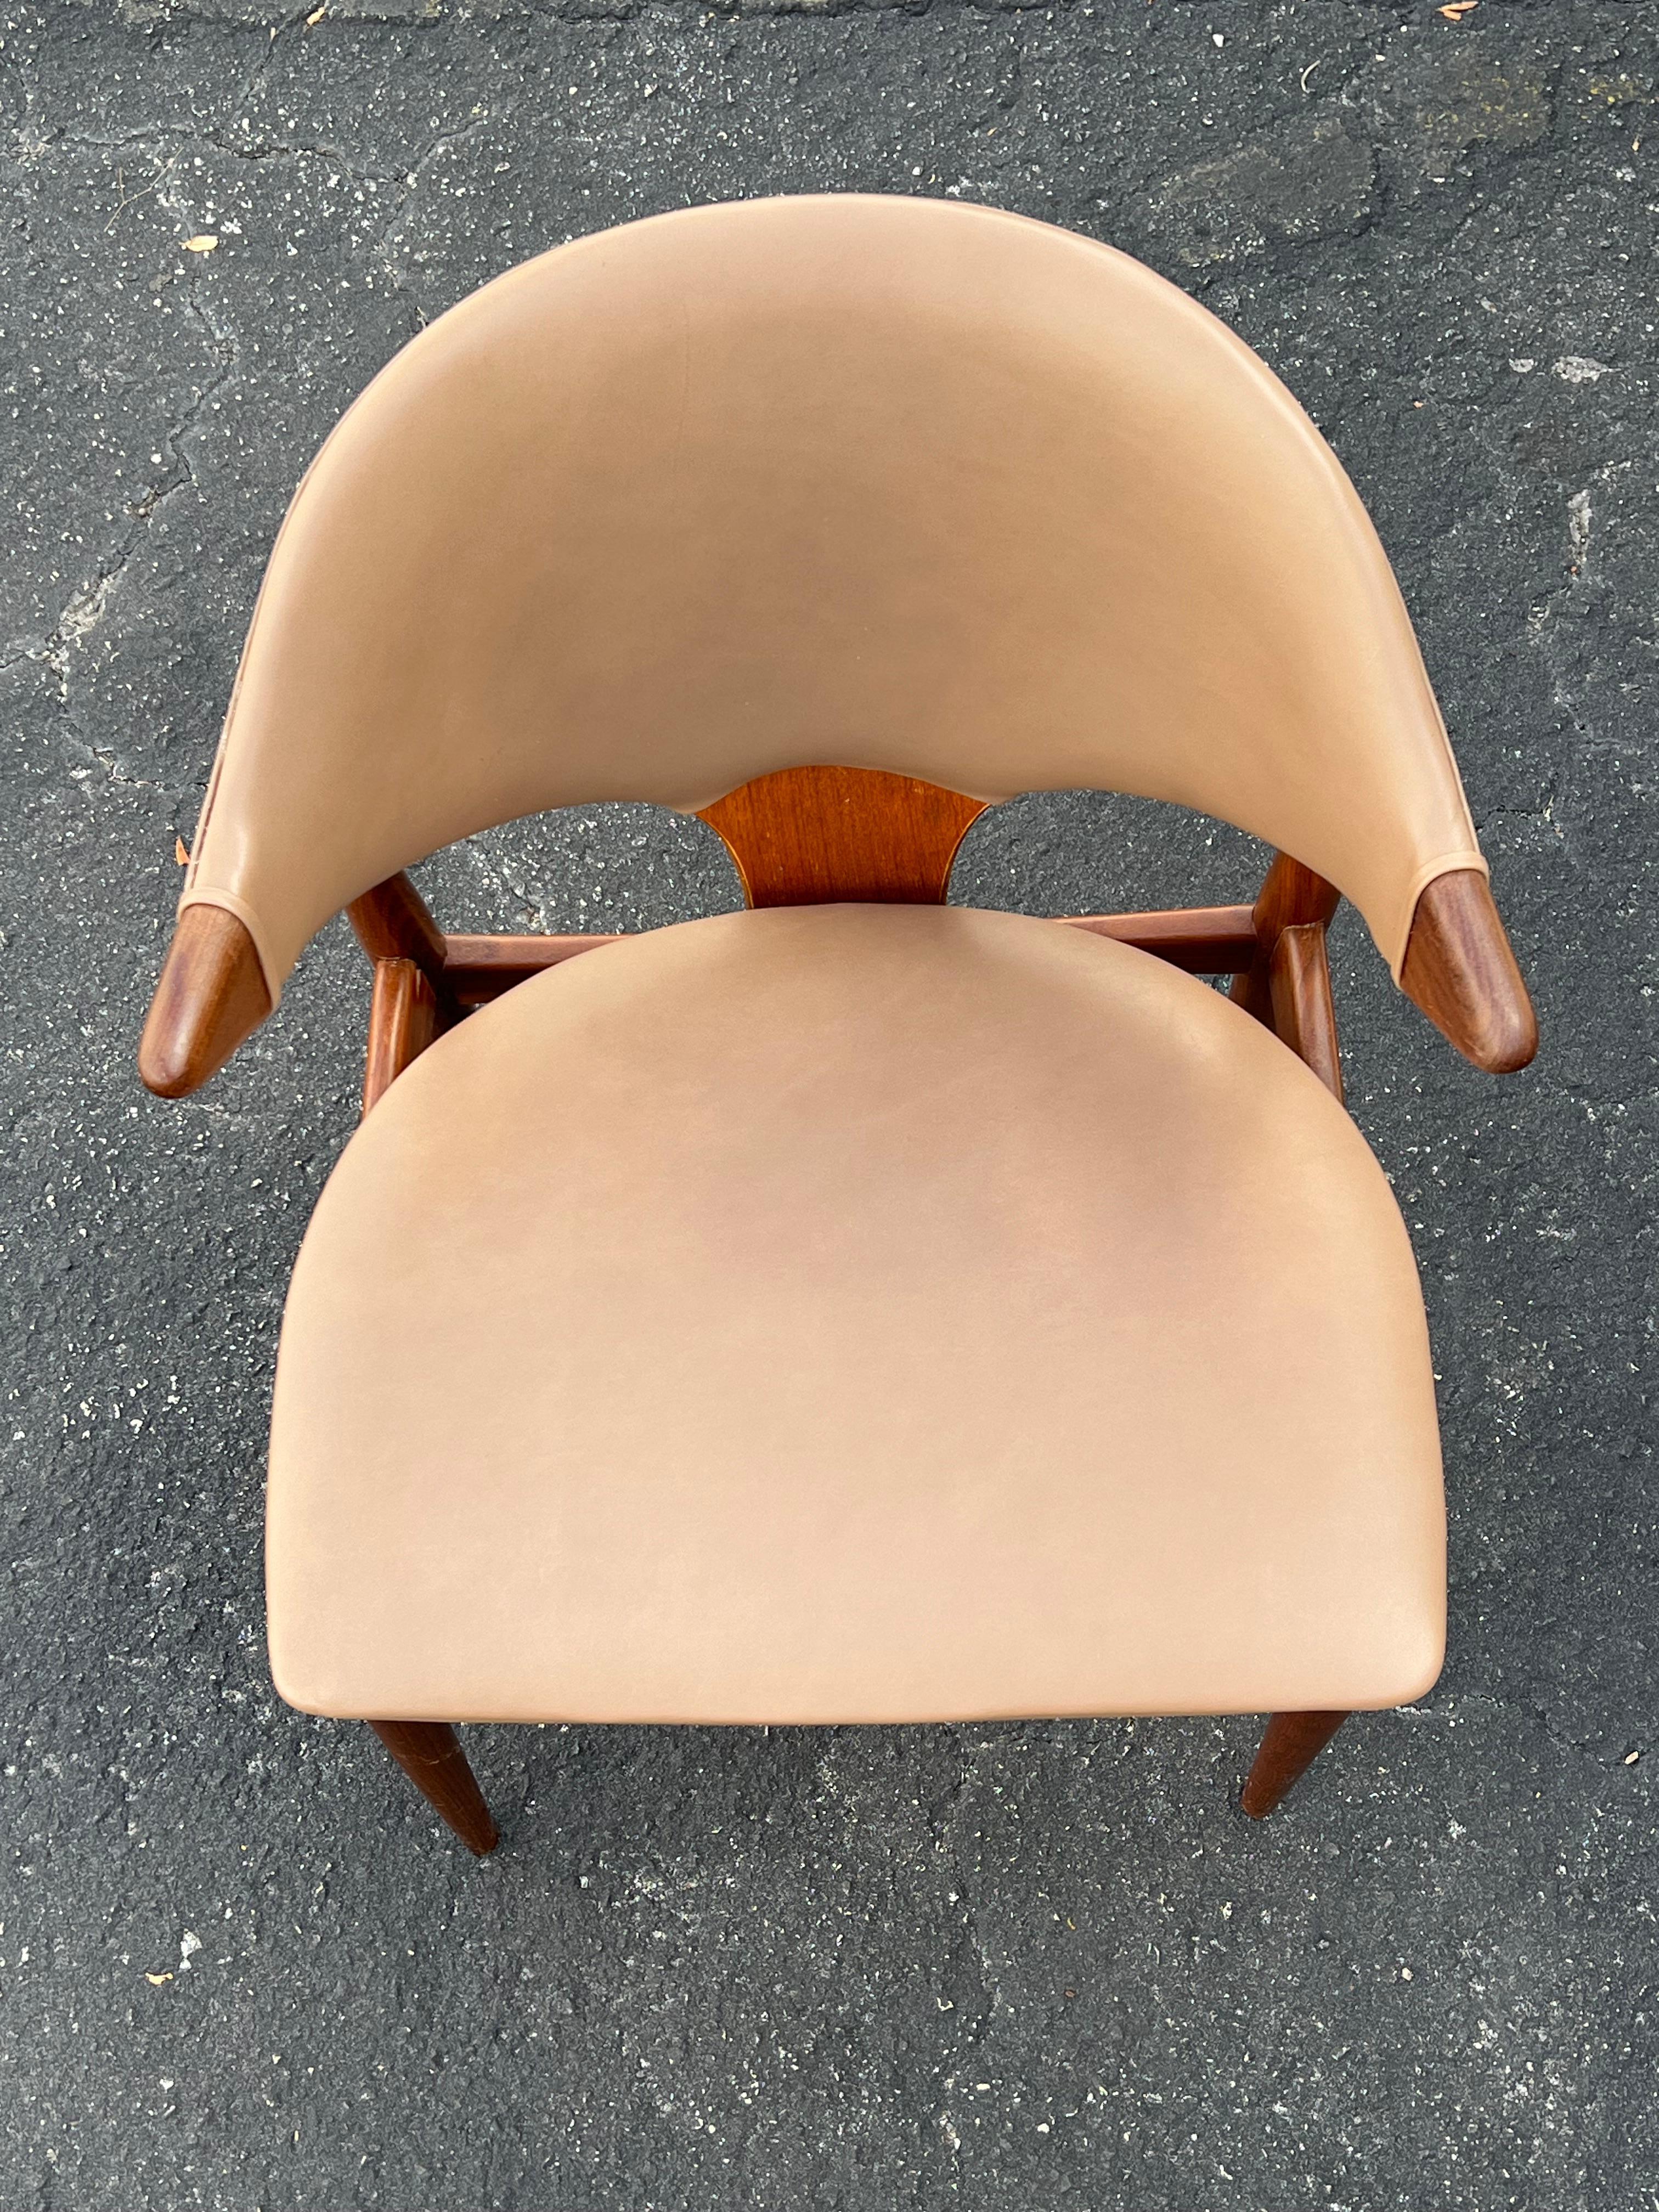 Classic Arne Vodder Leather And Teak Chair For Mahjongg Holland 1964 In Good Condition For Sale In St.Petersburg, FL